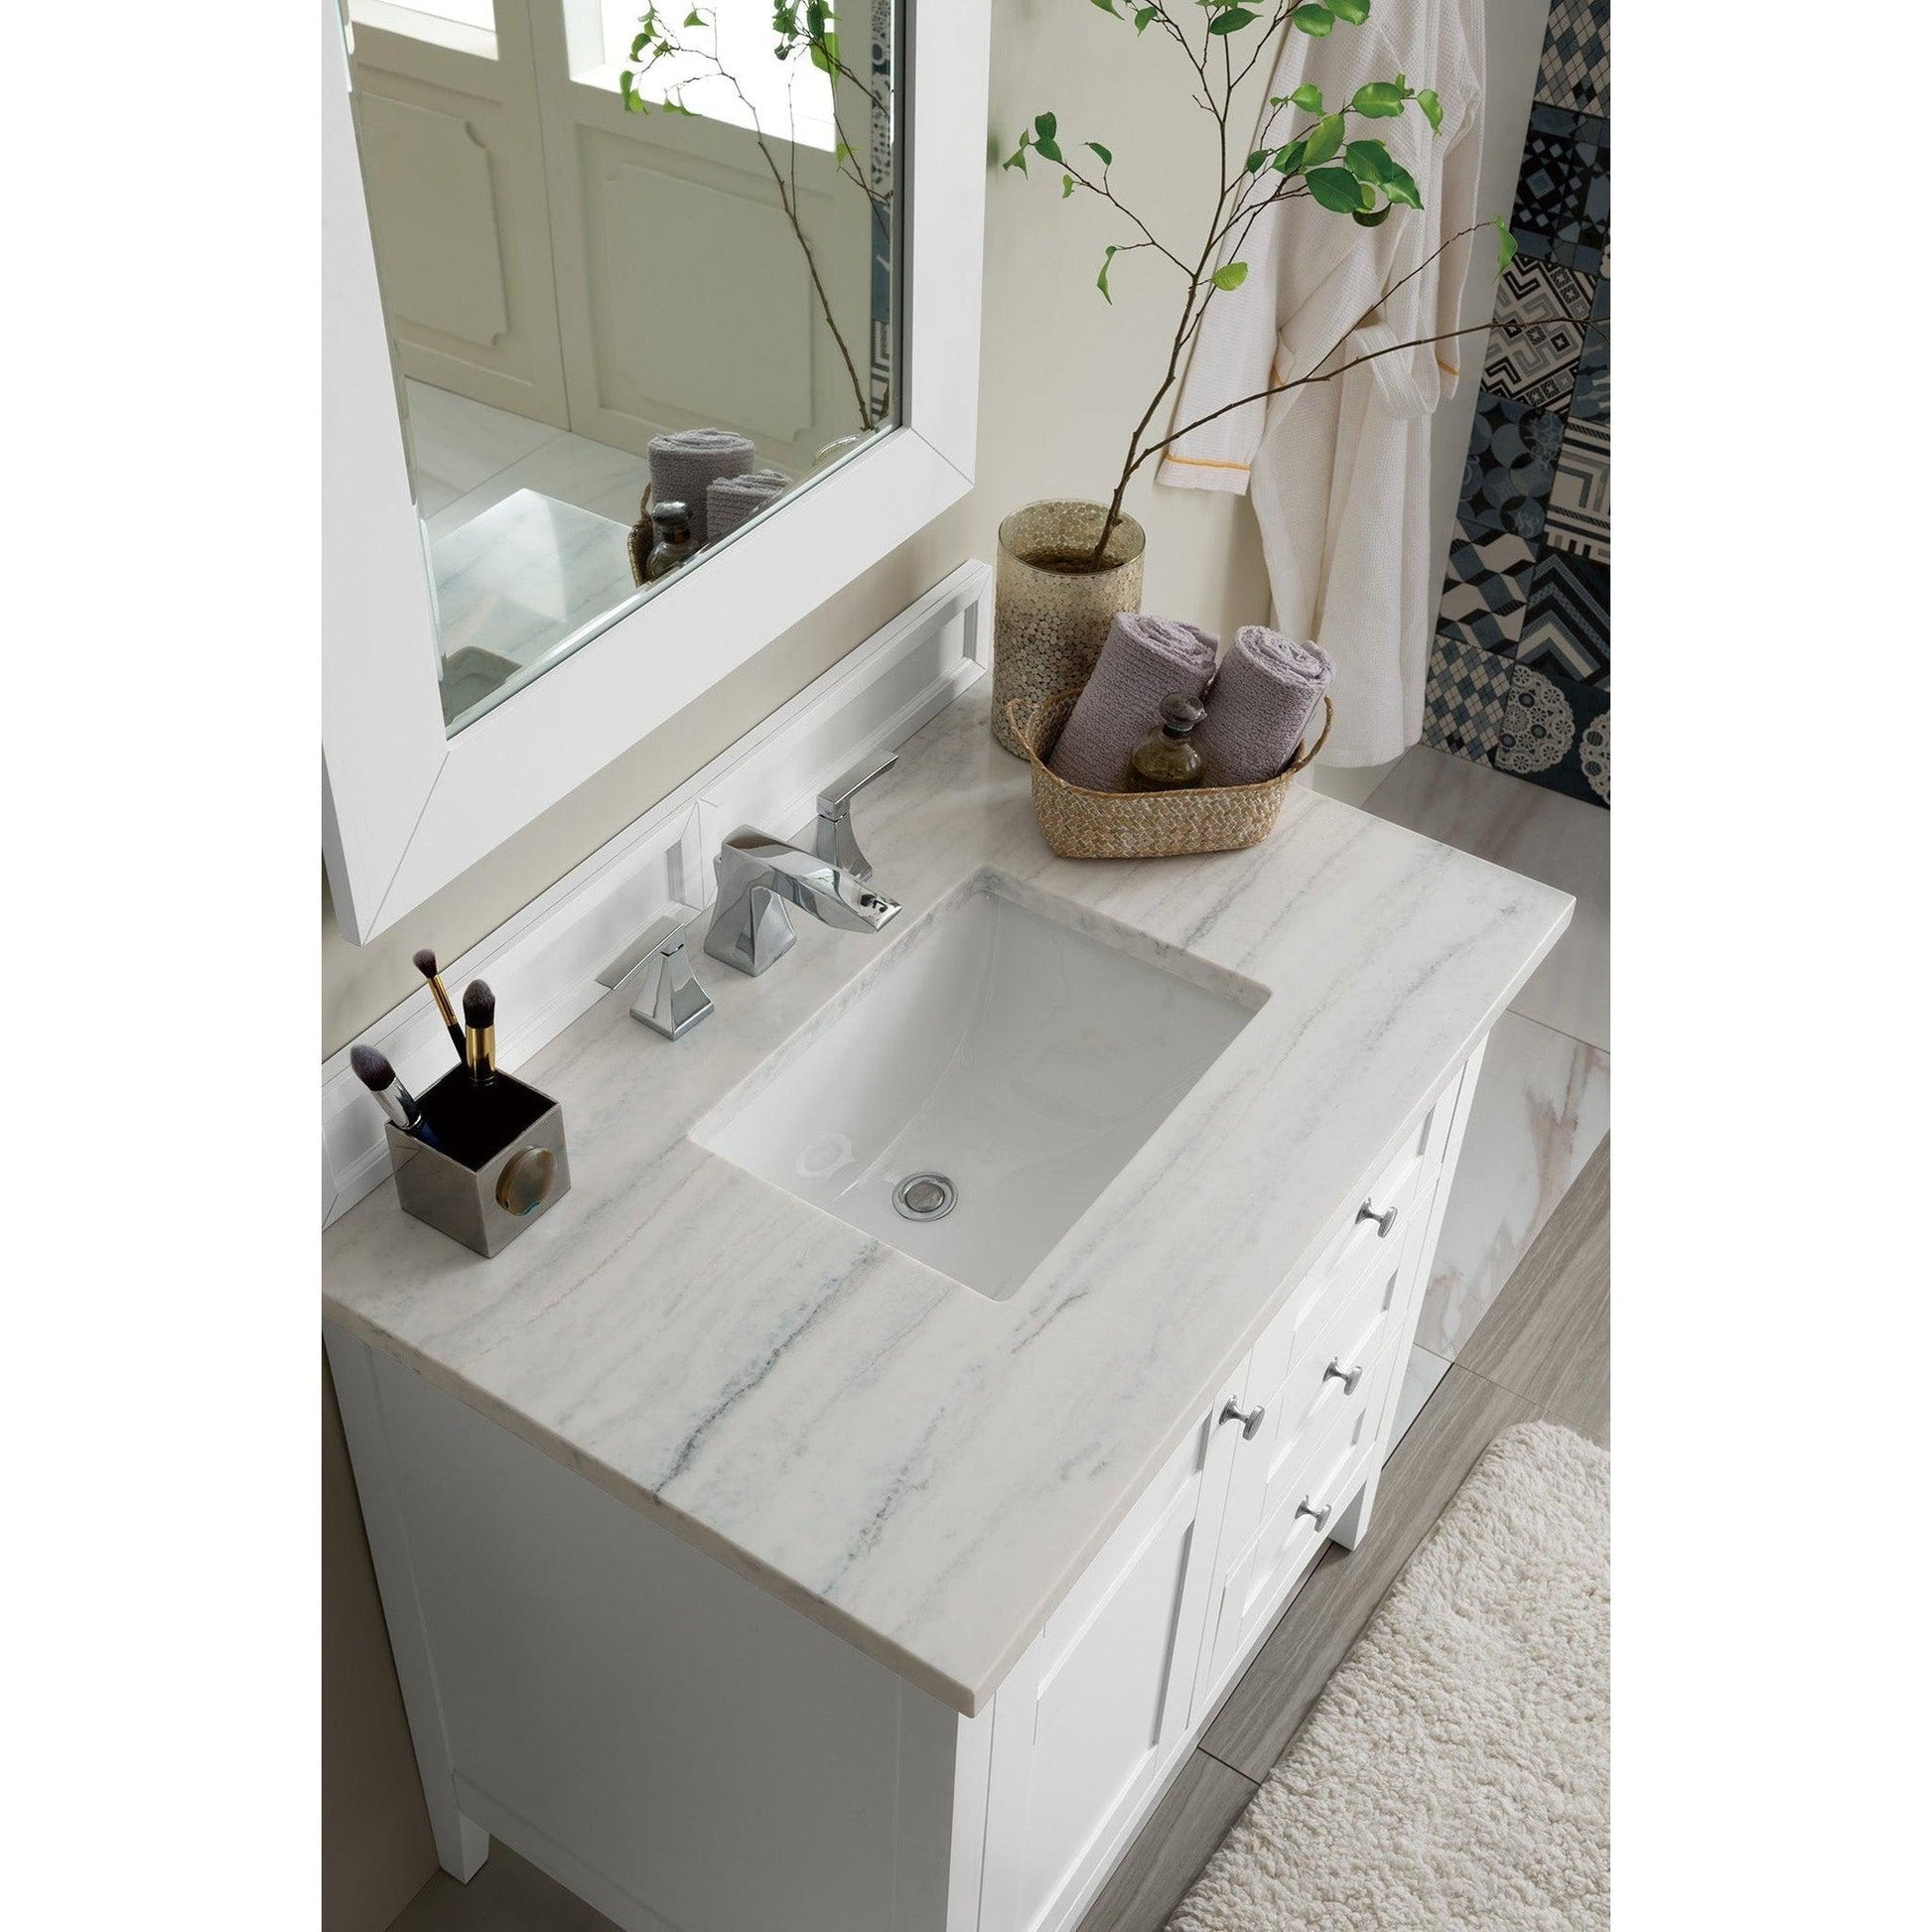 James Martin Vanities Palisades 36" Bright White Single Vanity With 3cm Arctic Fall Solid Surface Top